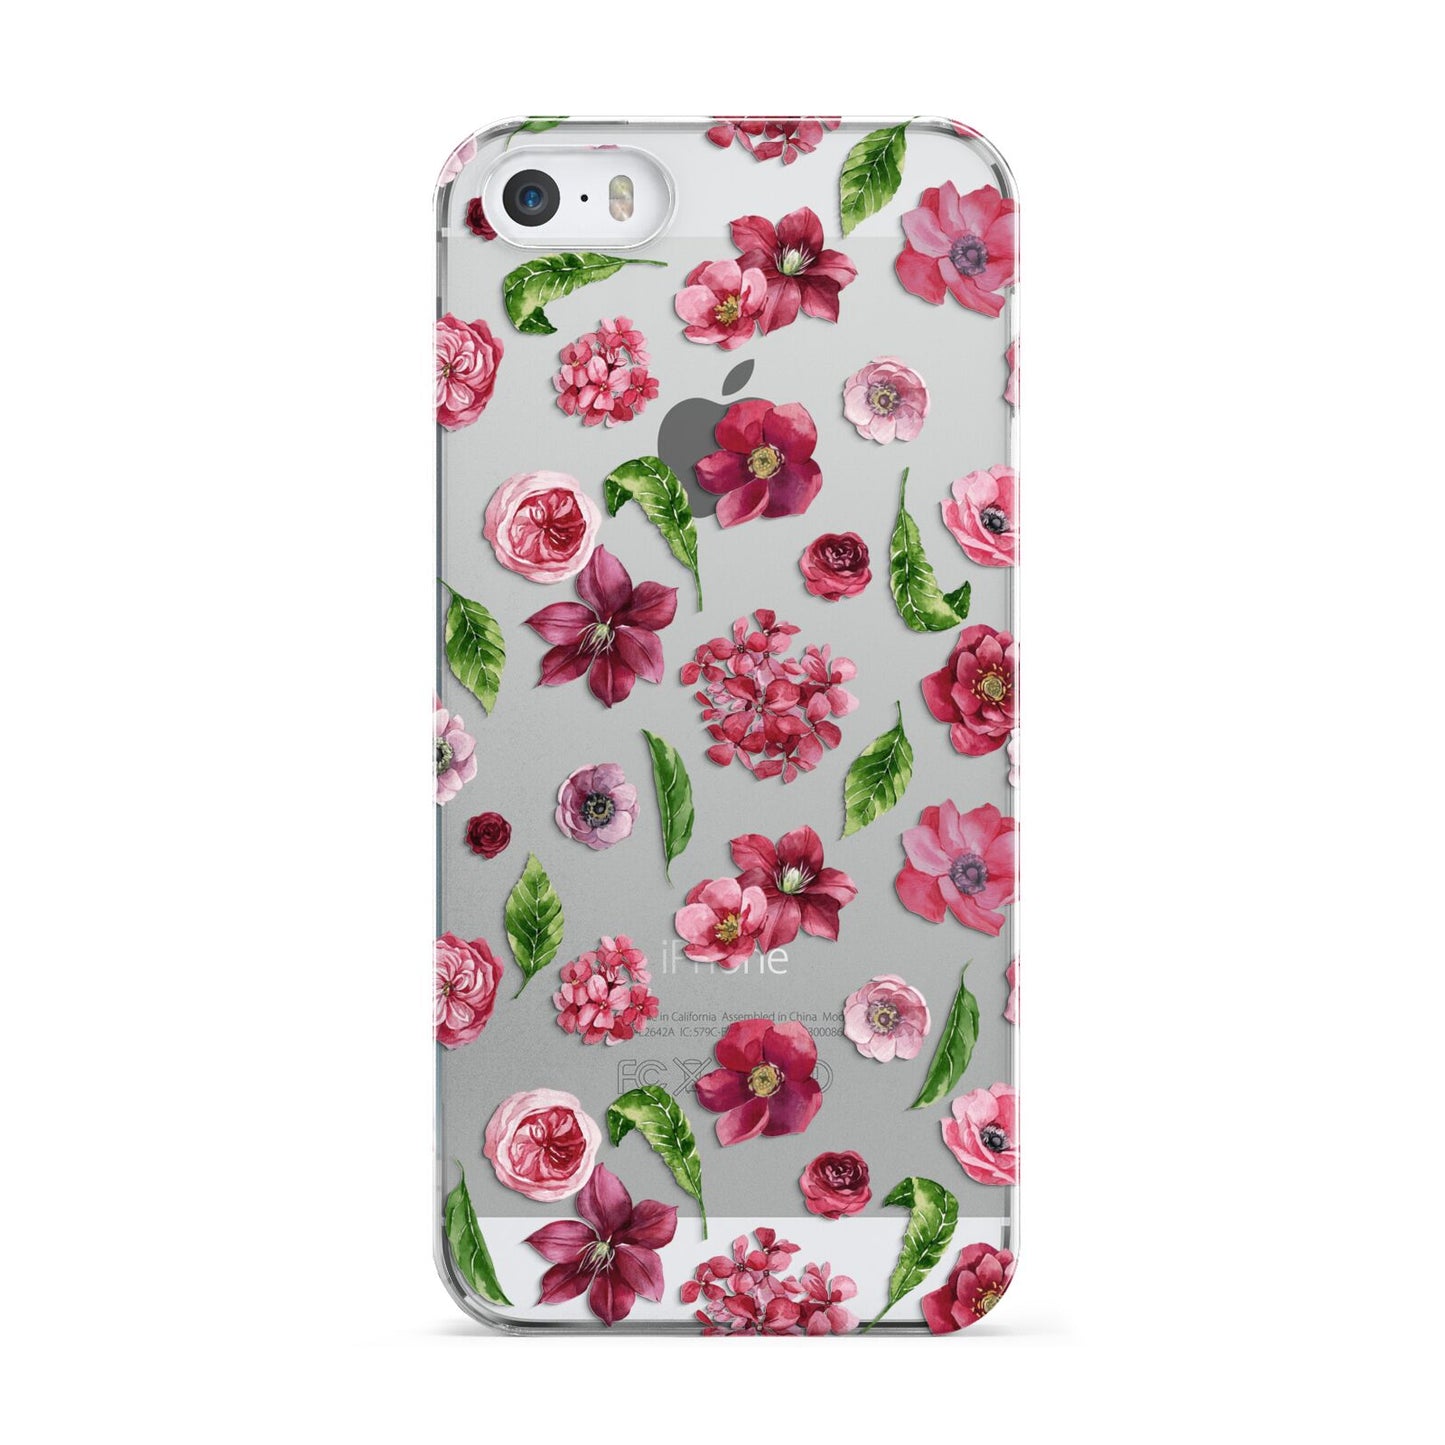 Pink Floral Apple iPhone 5 Case